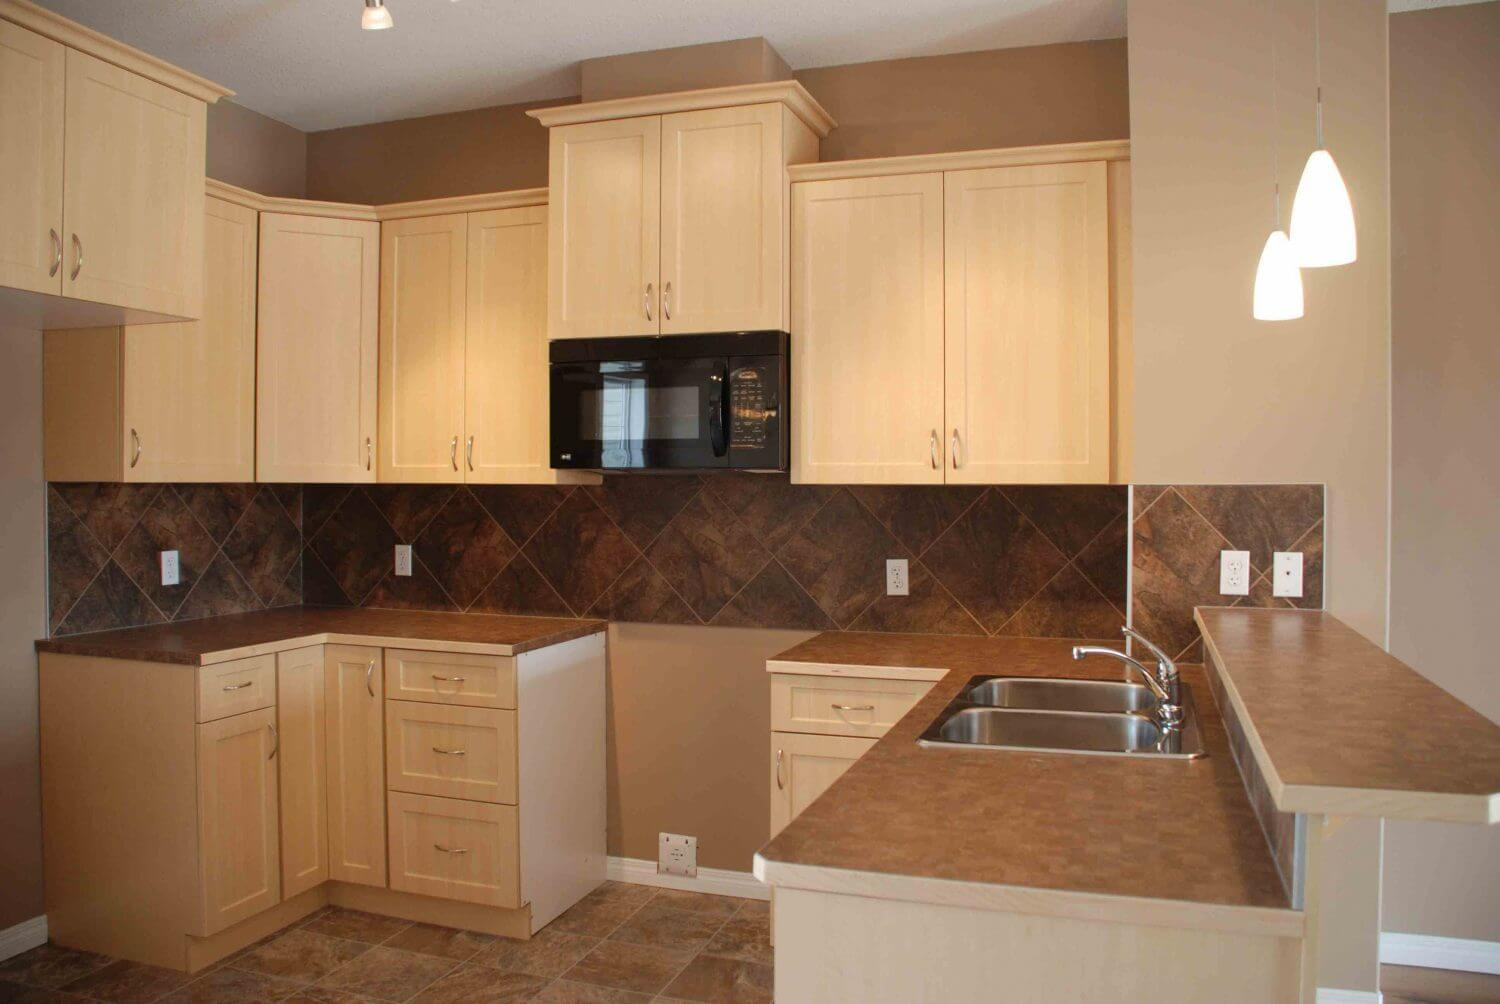 Kitchen Cabinet Sales
 Used Kitchen Cabinets for Sale by Owner TheyDesign